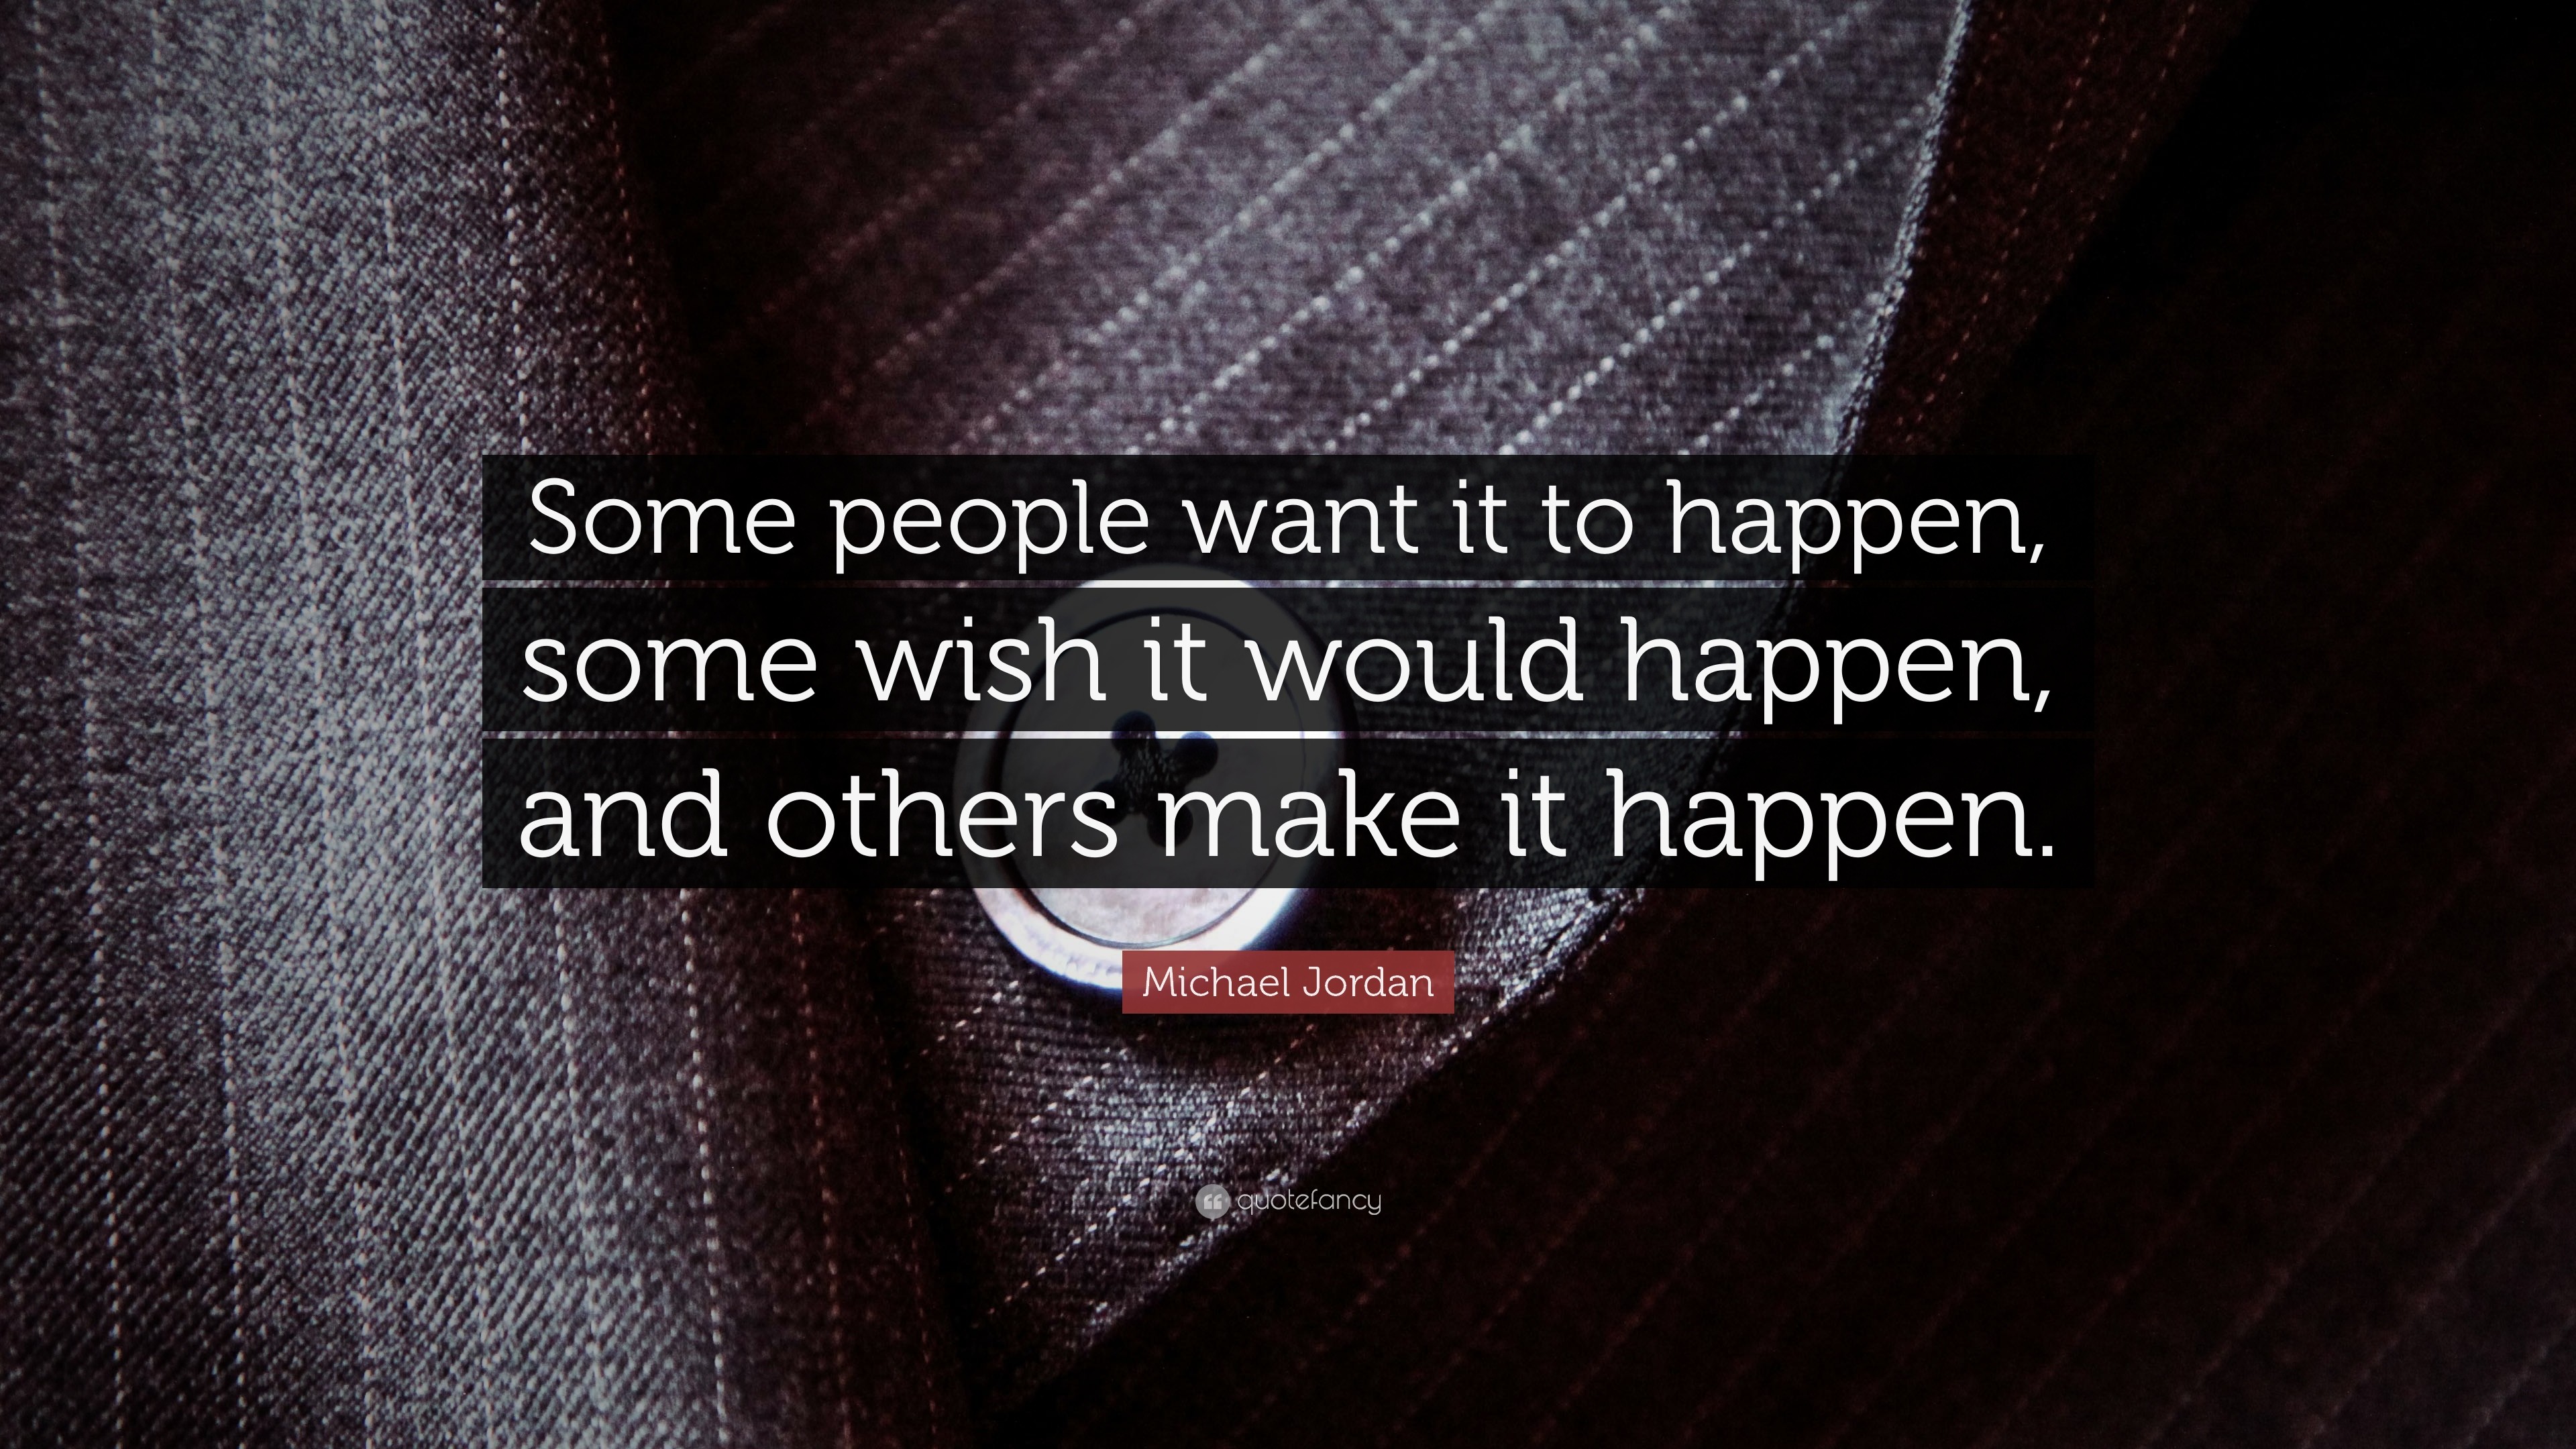 3840x2160 Michael Jordan Quote: “Some people want it to happen, some wish it would